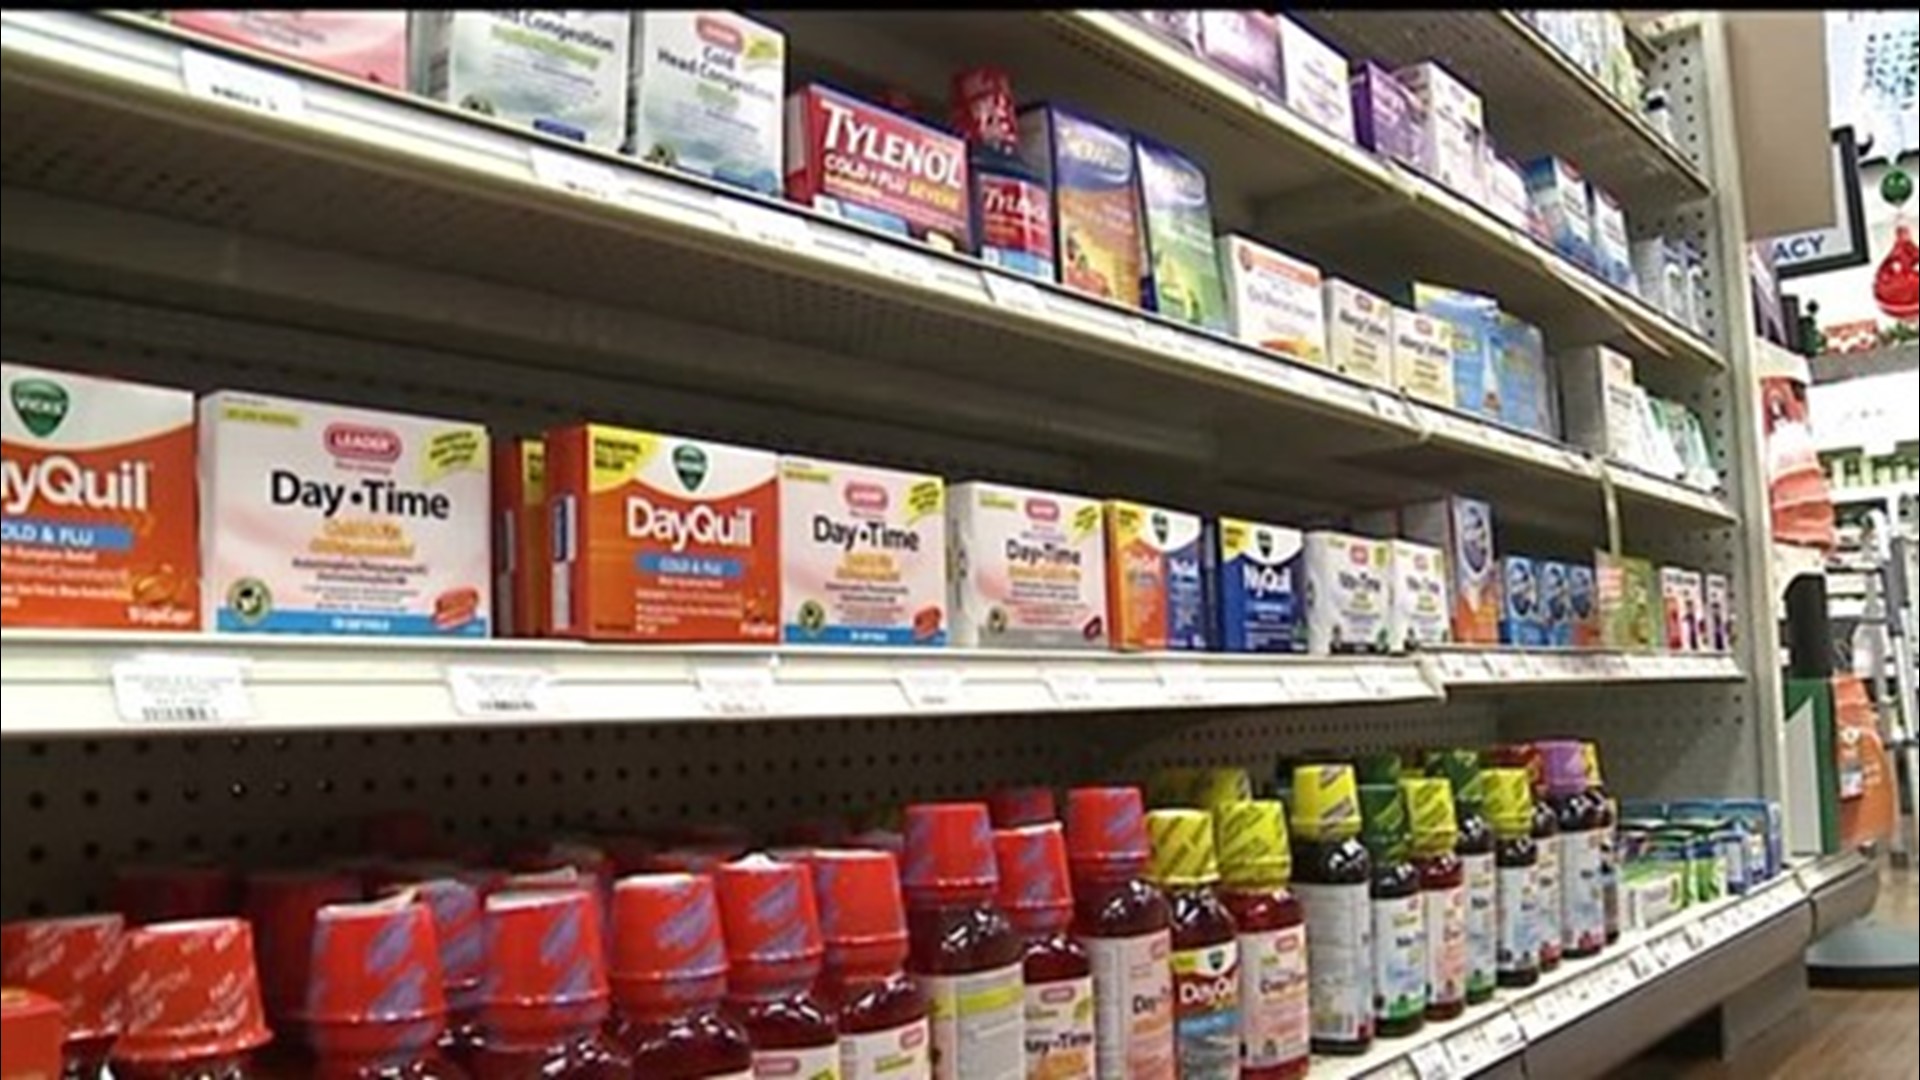 FOX43 stopped by three pharmacies in York and found that while they had items in stock, they were running low.